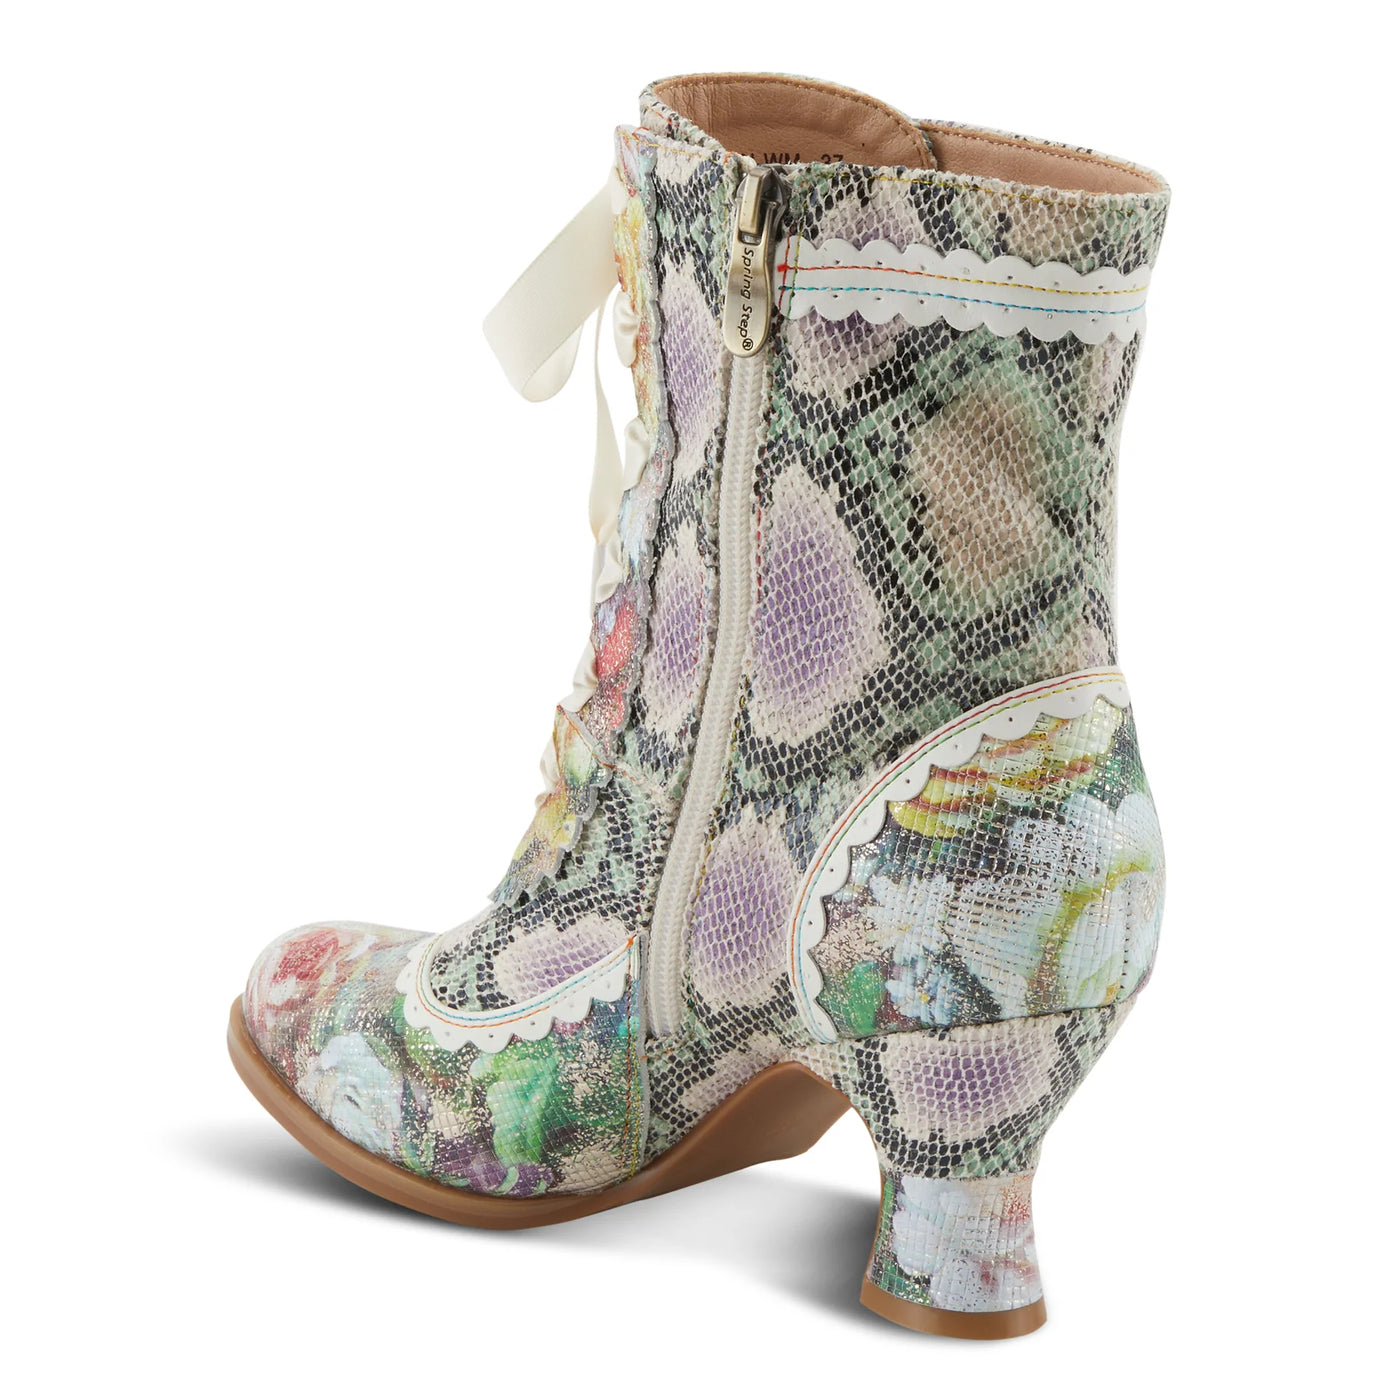 Rococo Budding Ankle Boots in White